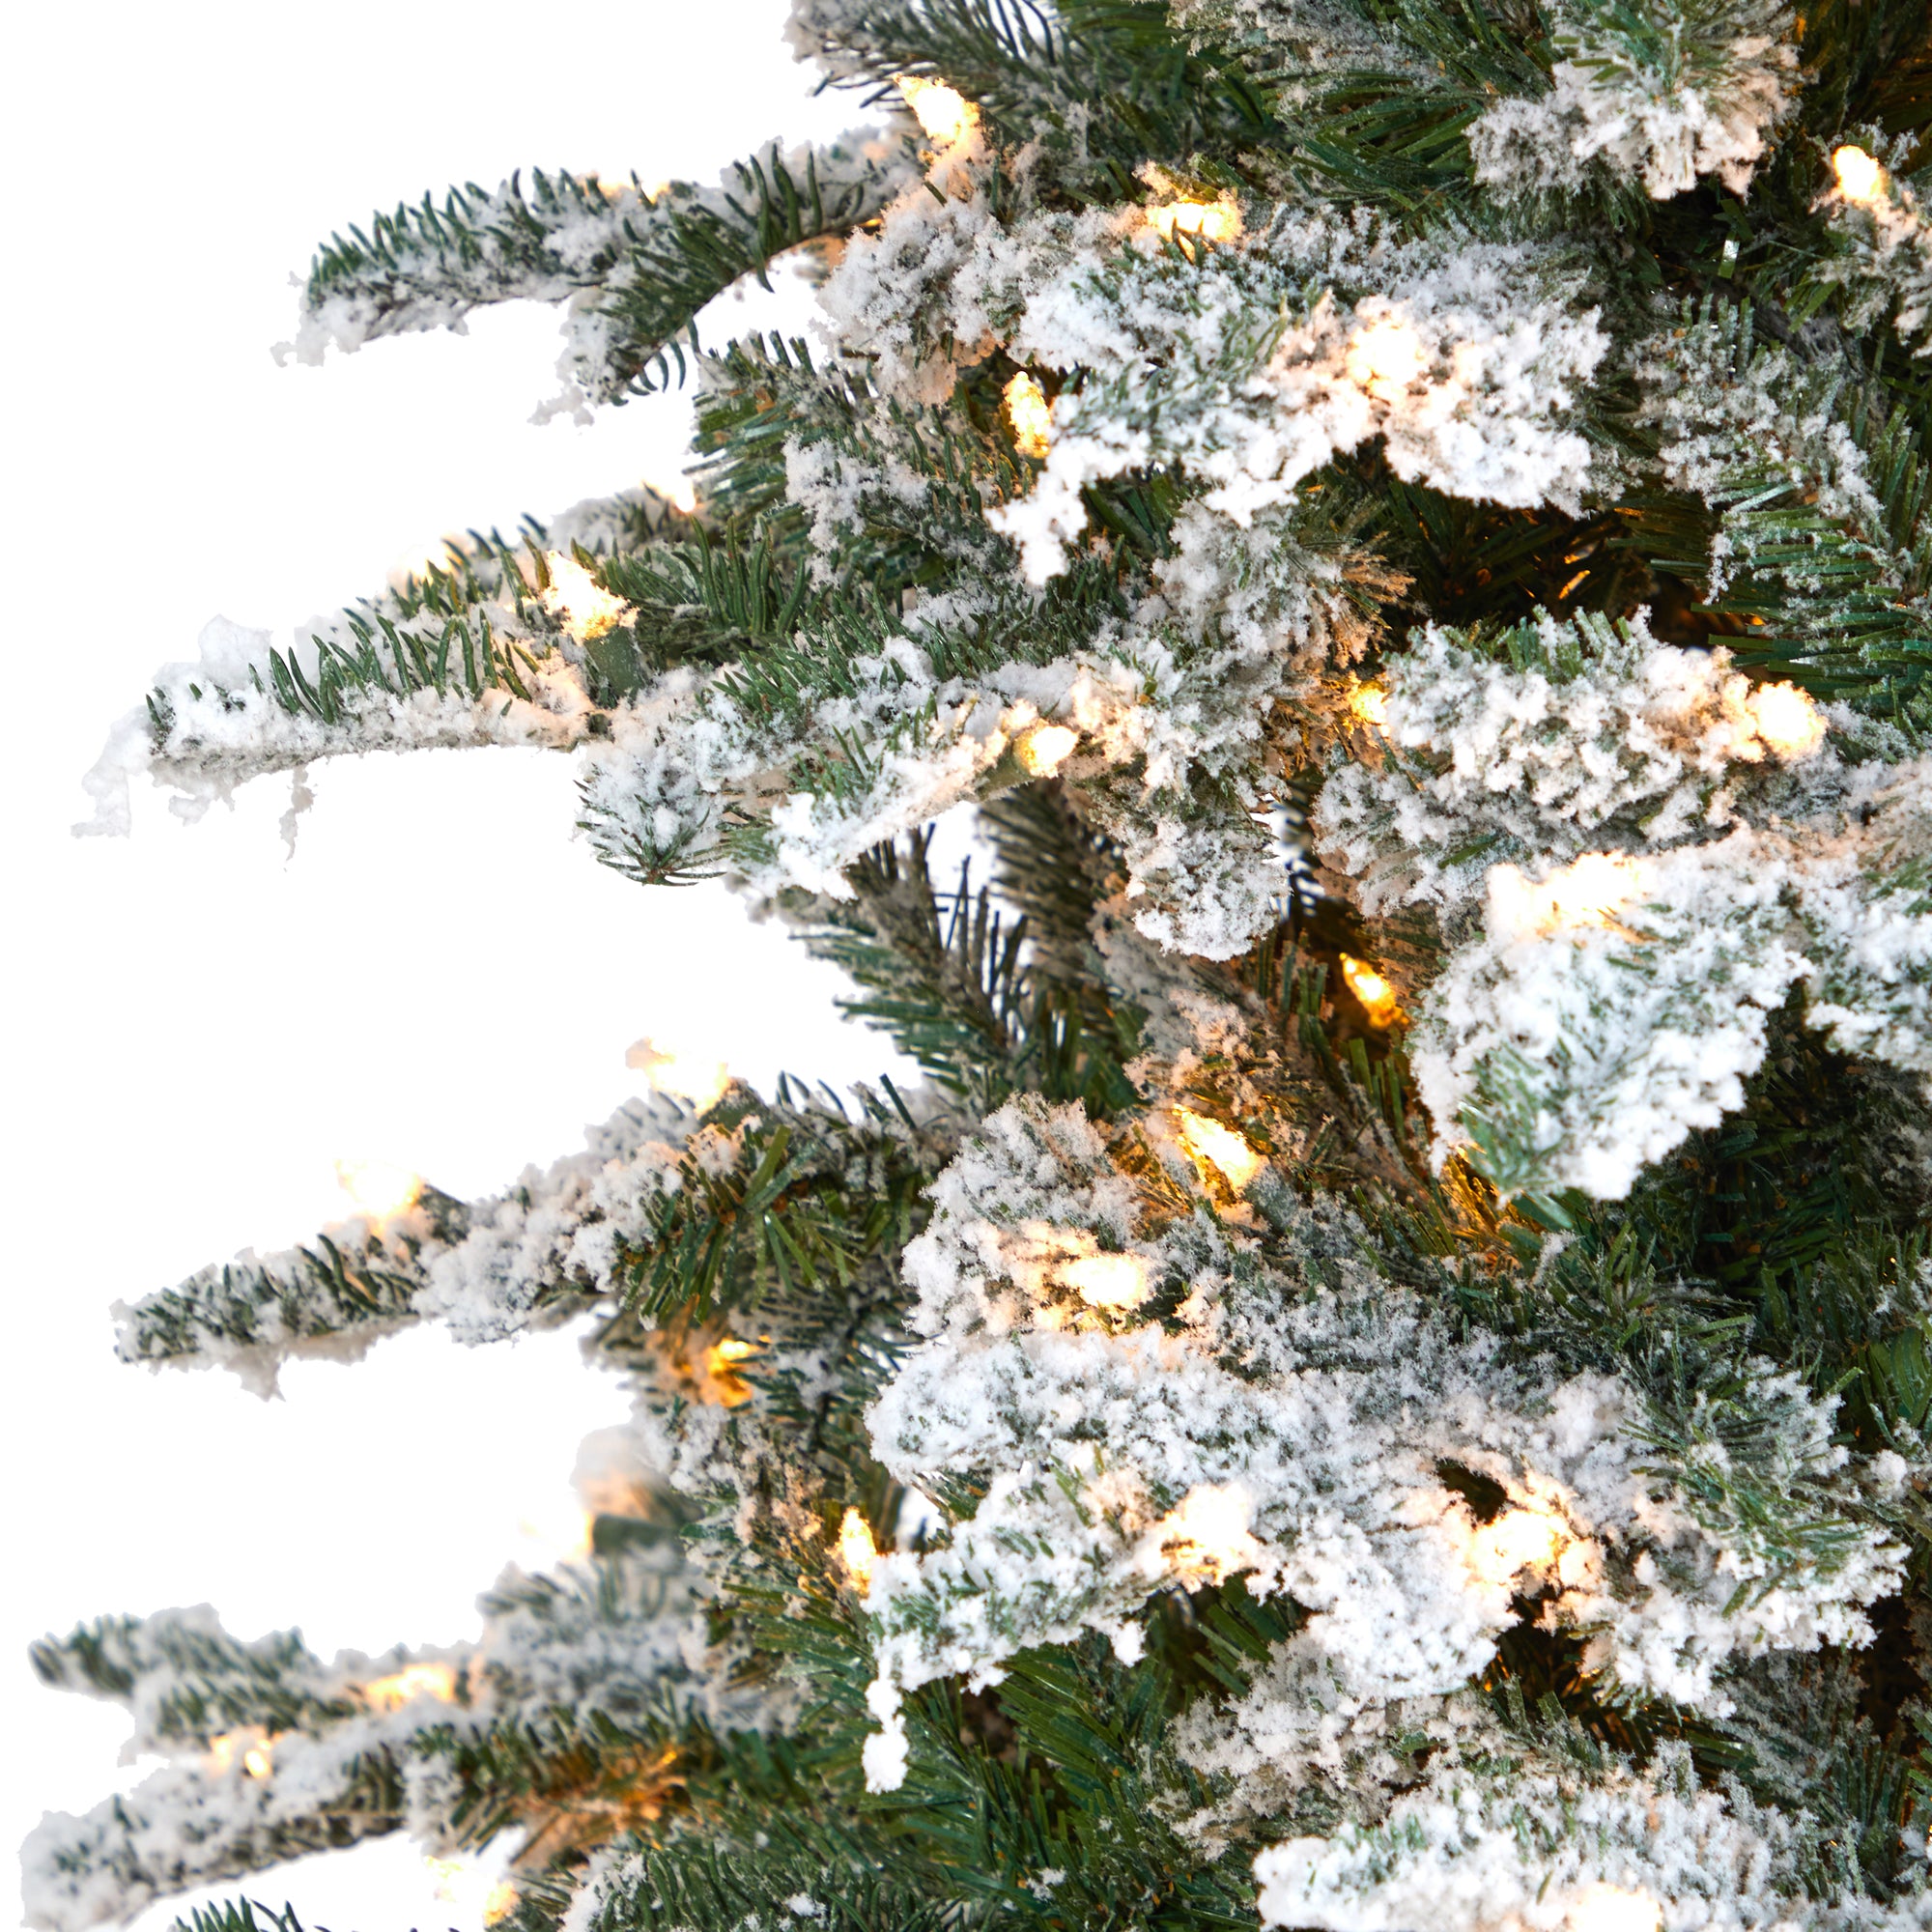 8' Flocked North Carolina Fir Artificial Christmas Tree with 650 Warm White Lights and 2593 Bendable Branches